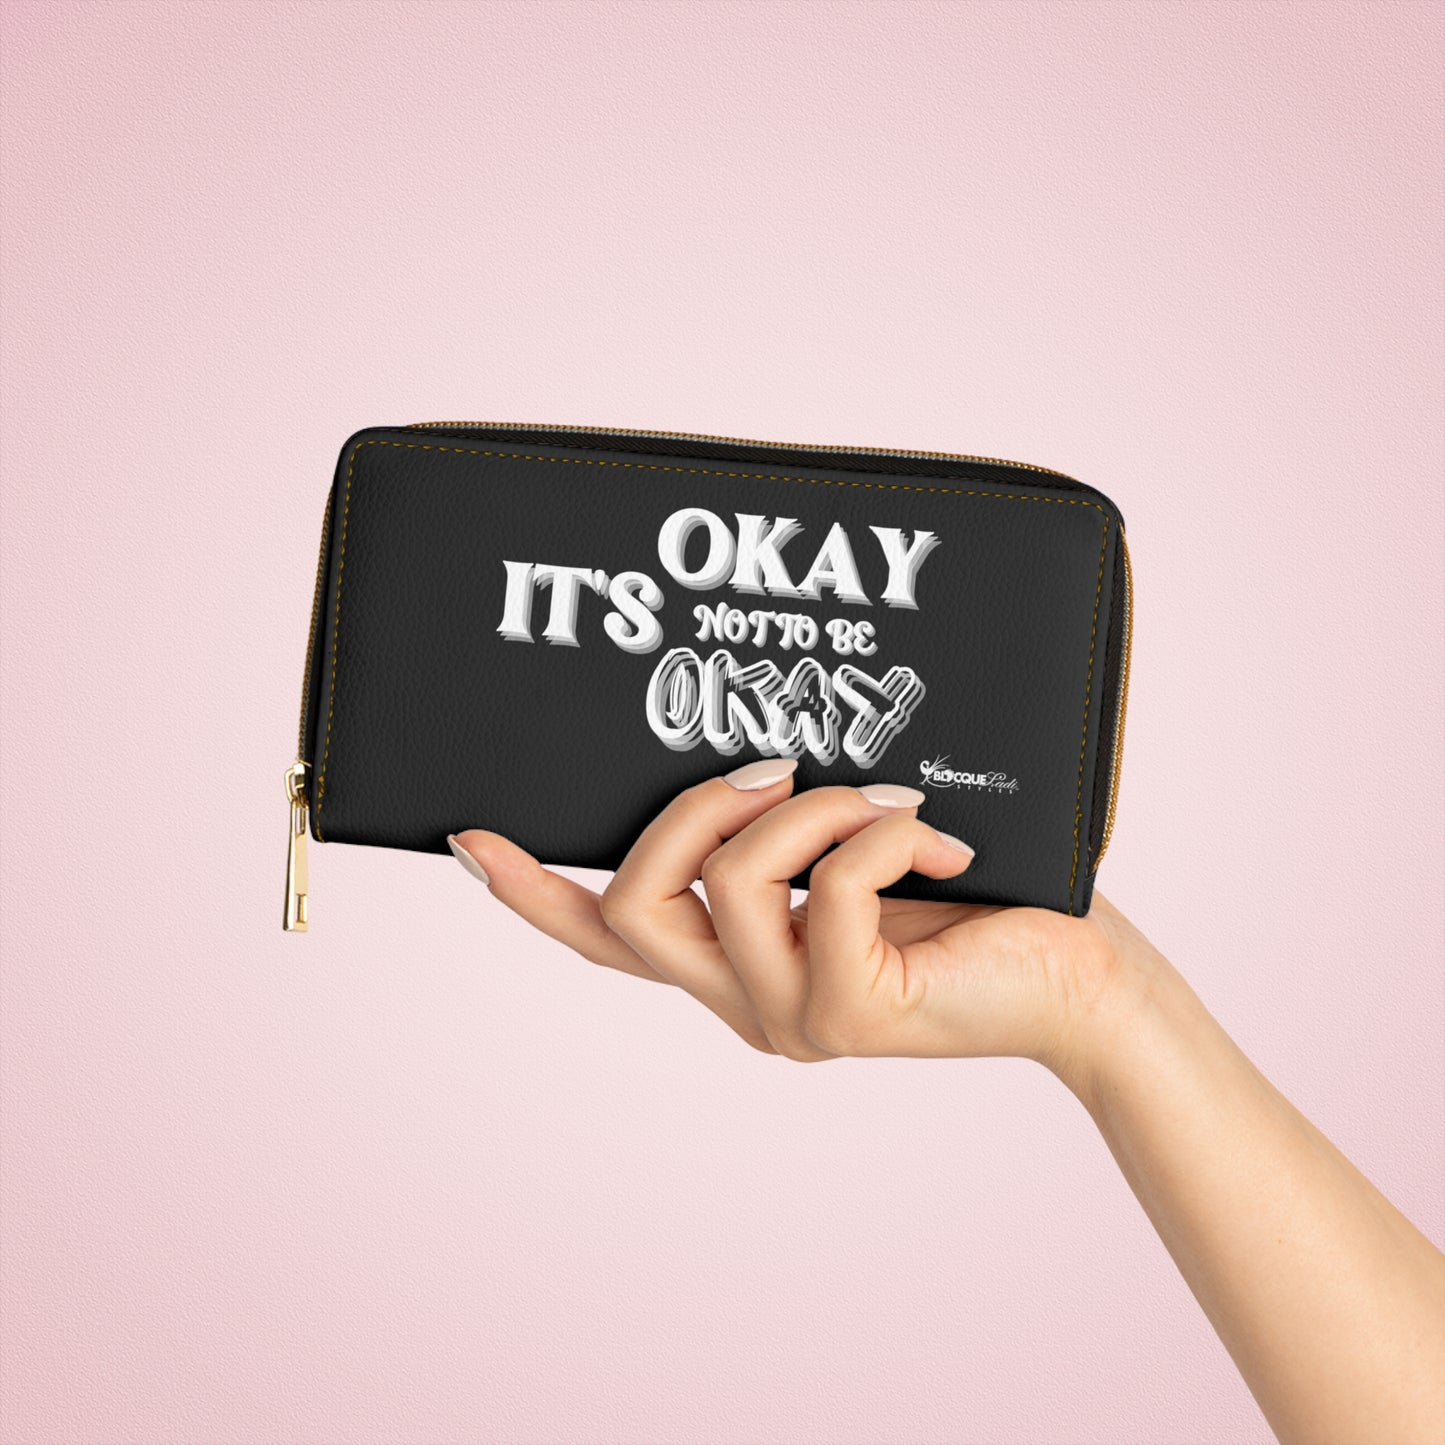 IT’S OKAY, NOT TO BE OKAY- Positive Afrocentric Affirmation Vegan Leather Wallet Bag- Empower Your Style and Self-Love; Black Wallet